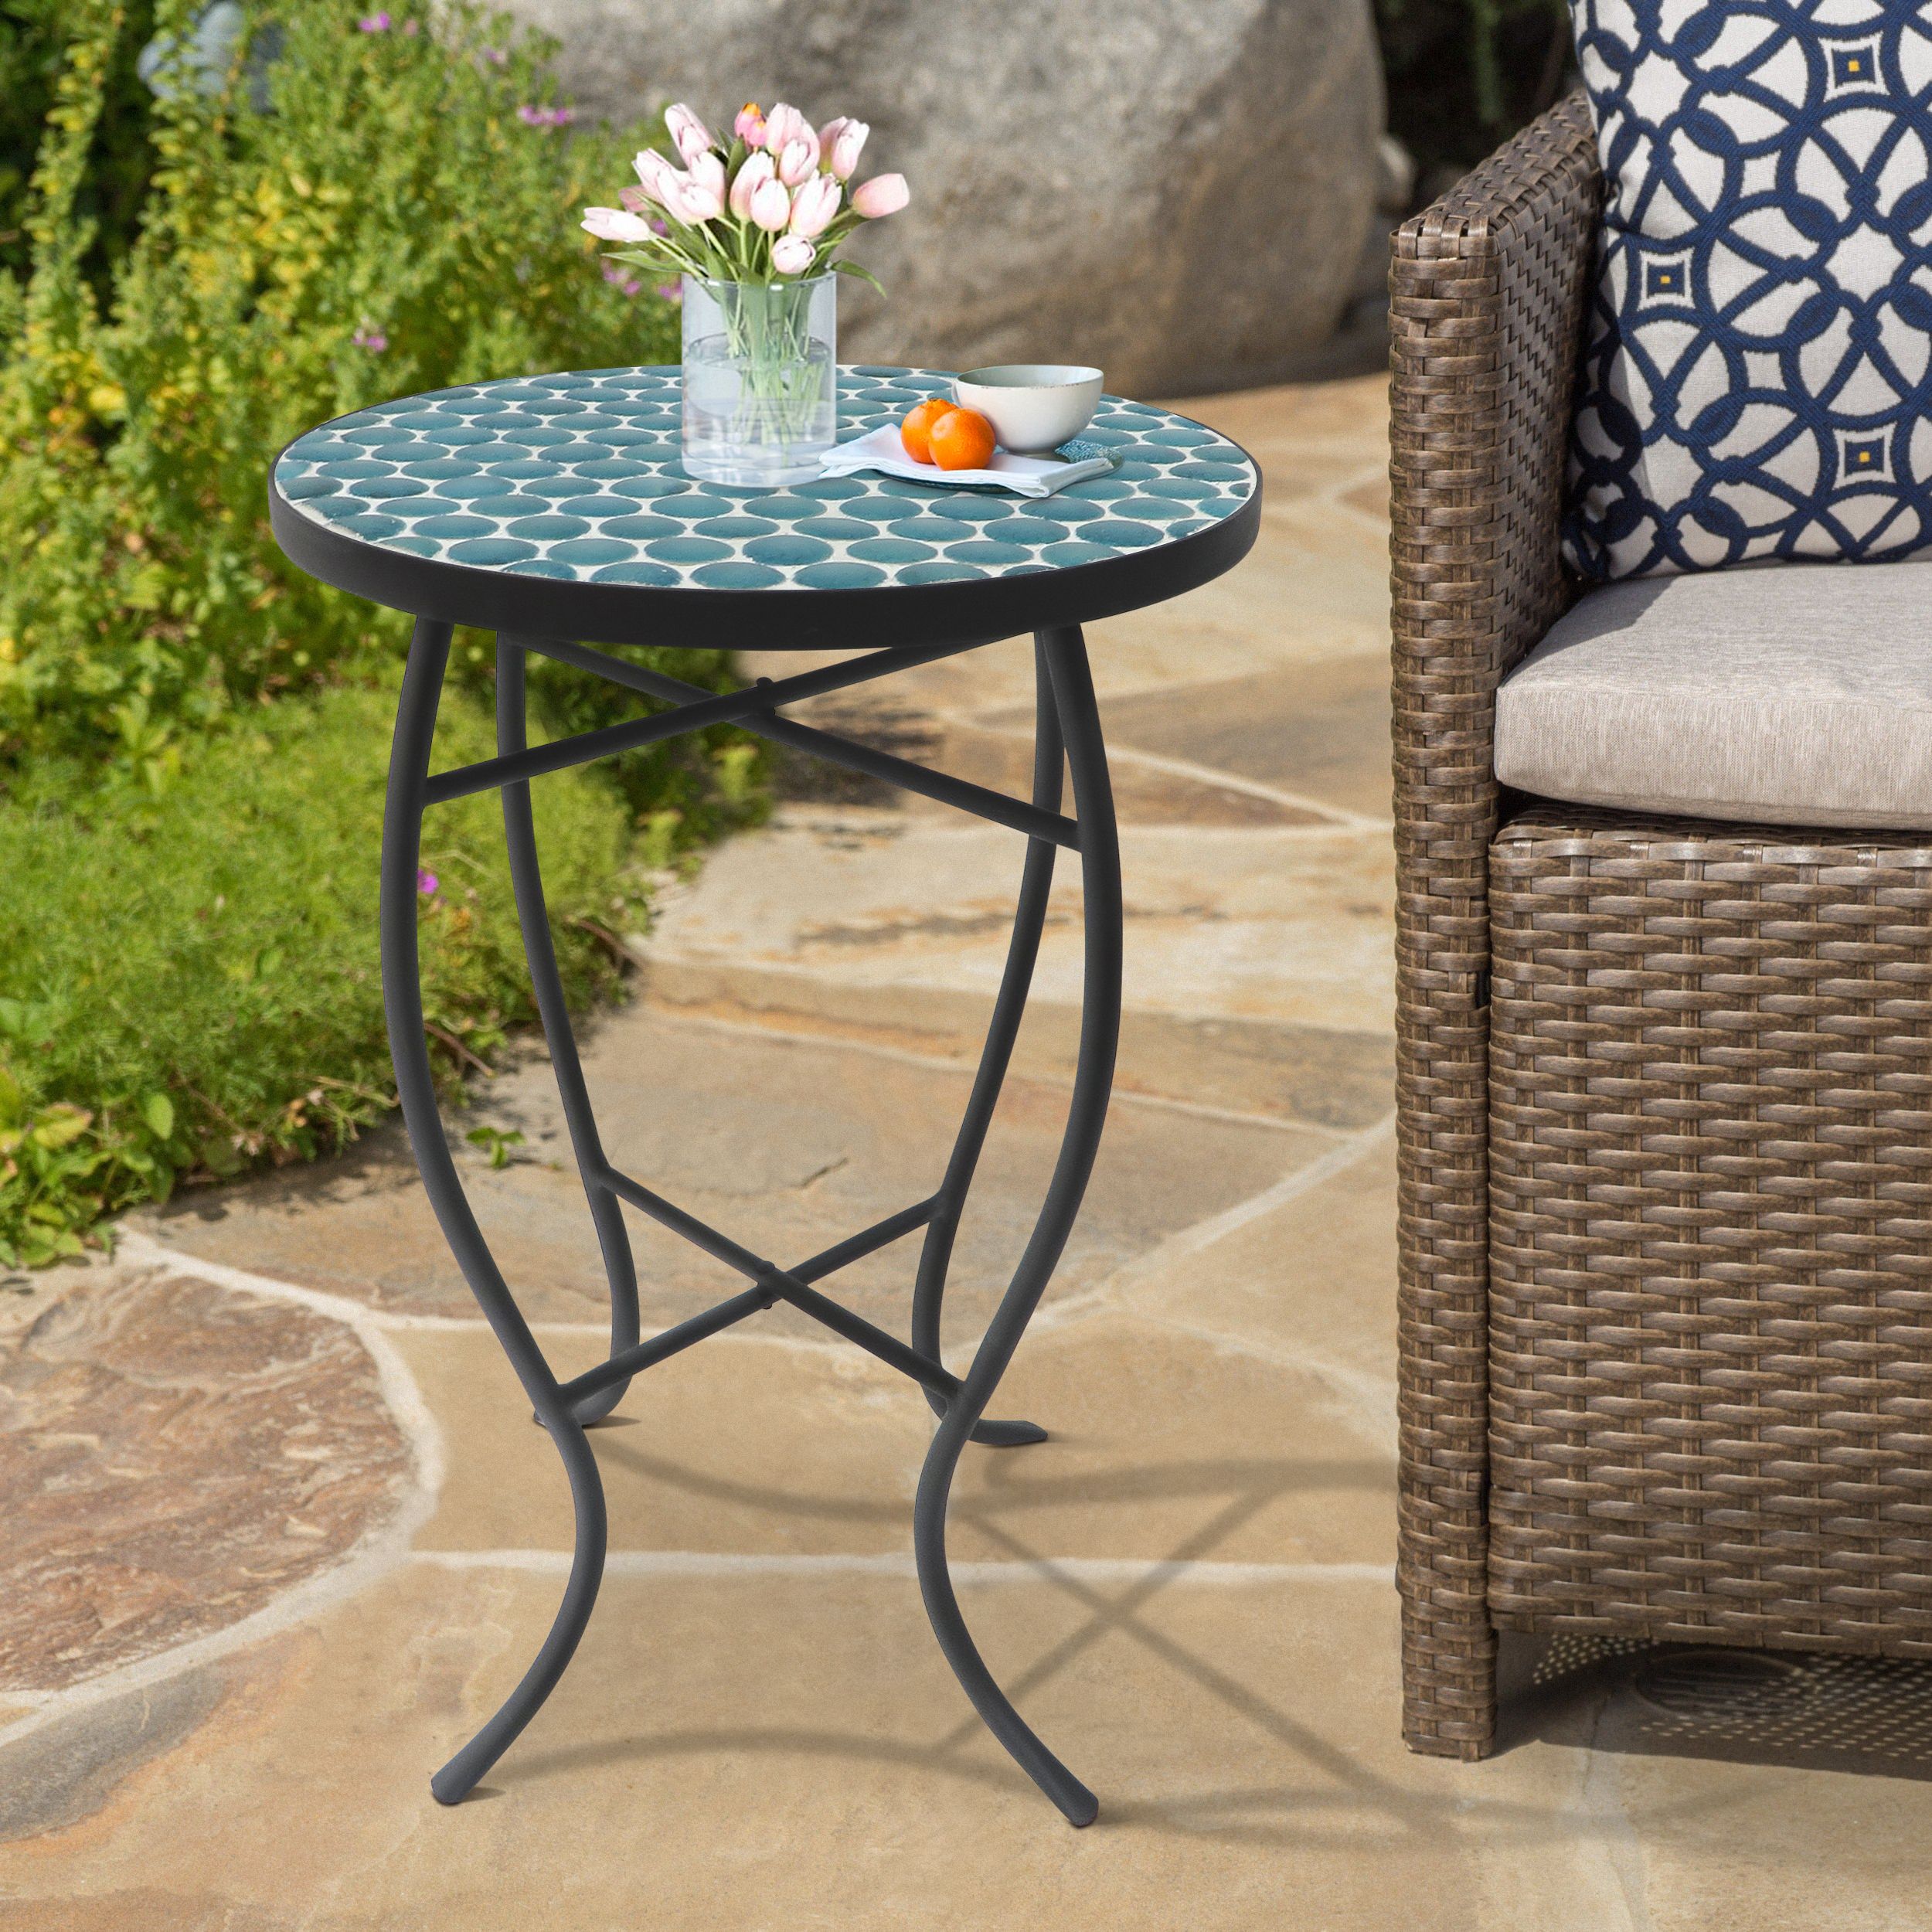 Folding Tables, Mosaic Tiles Round Outdoor Coffee Table